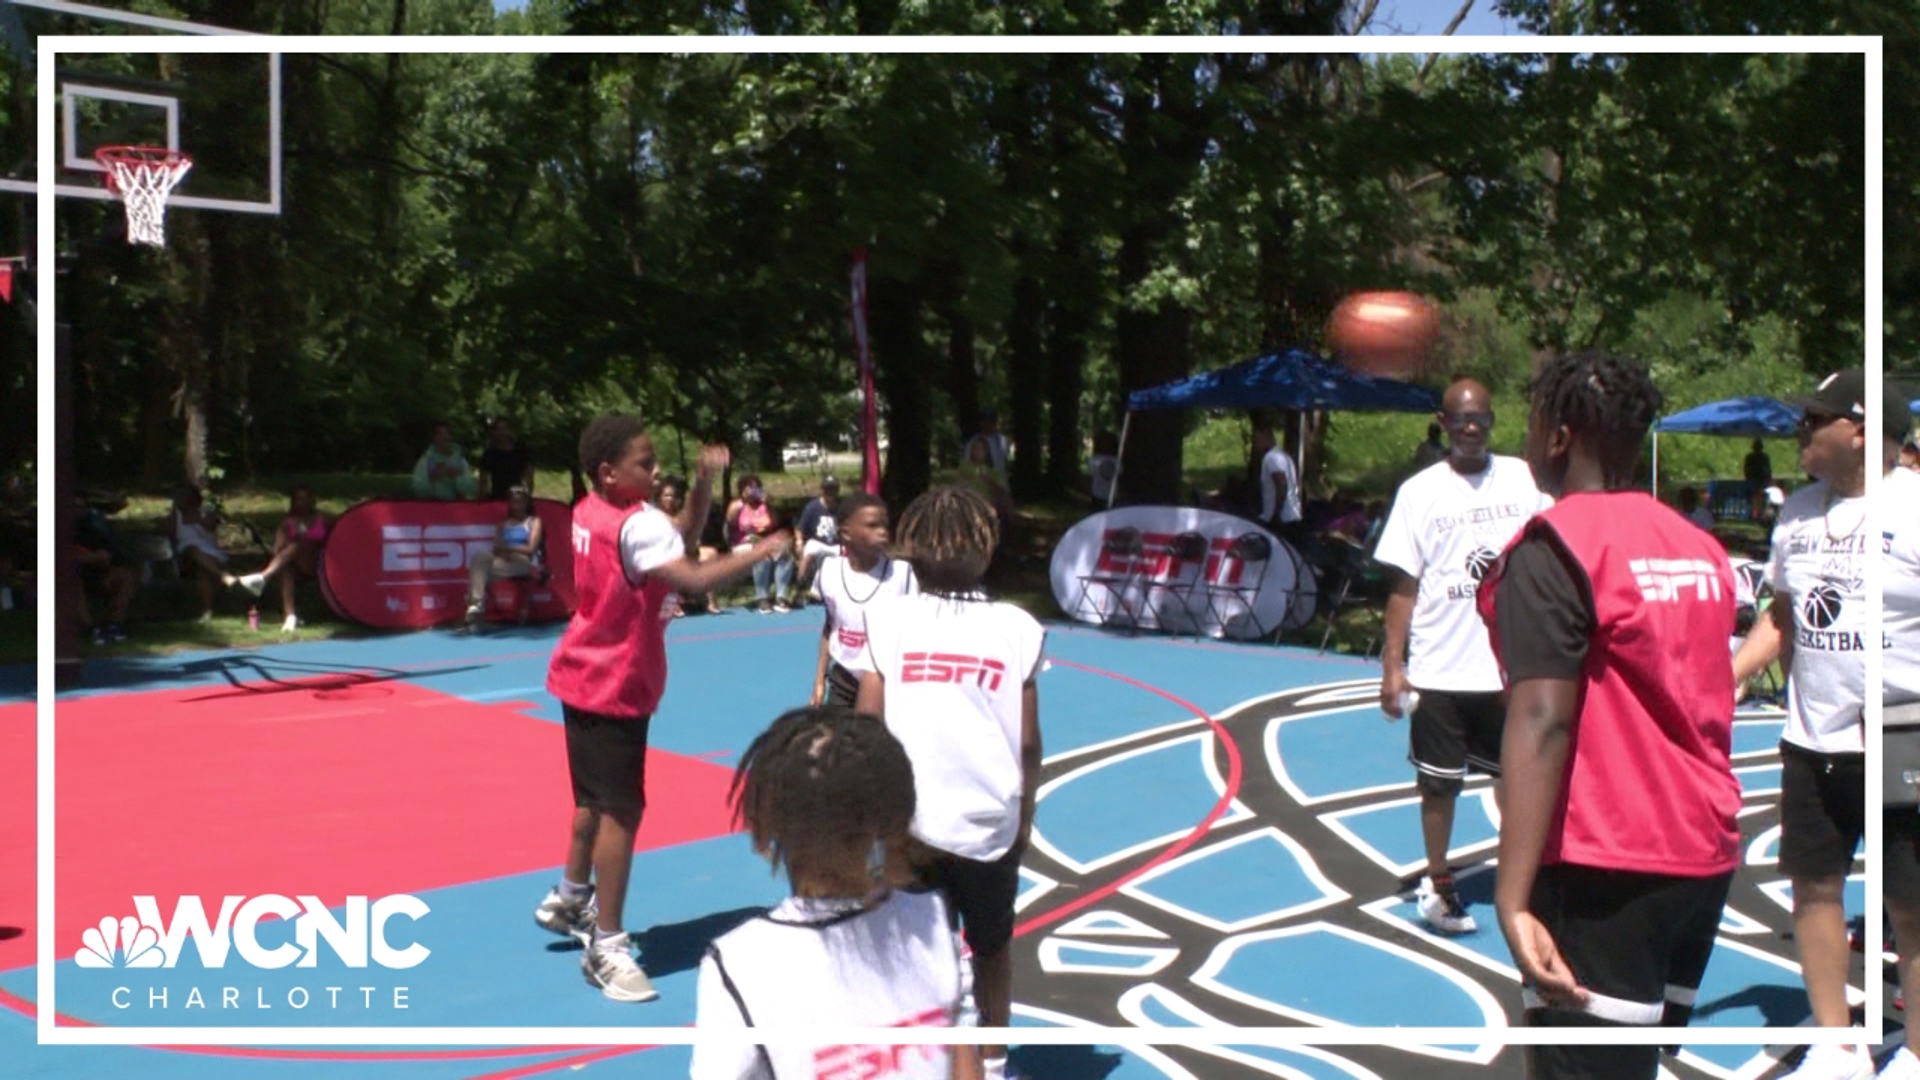 Sugaw Creek Park's two courts were refurbished by ESPN and community partners.